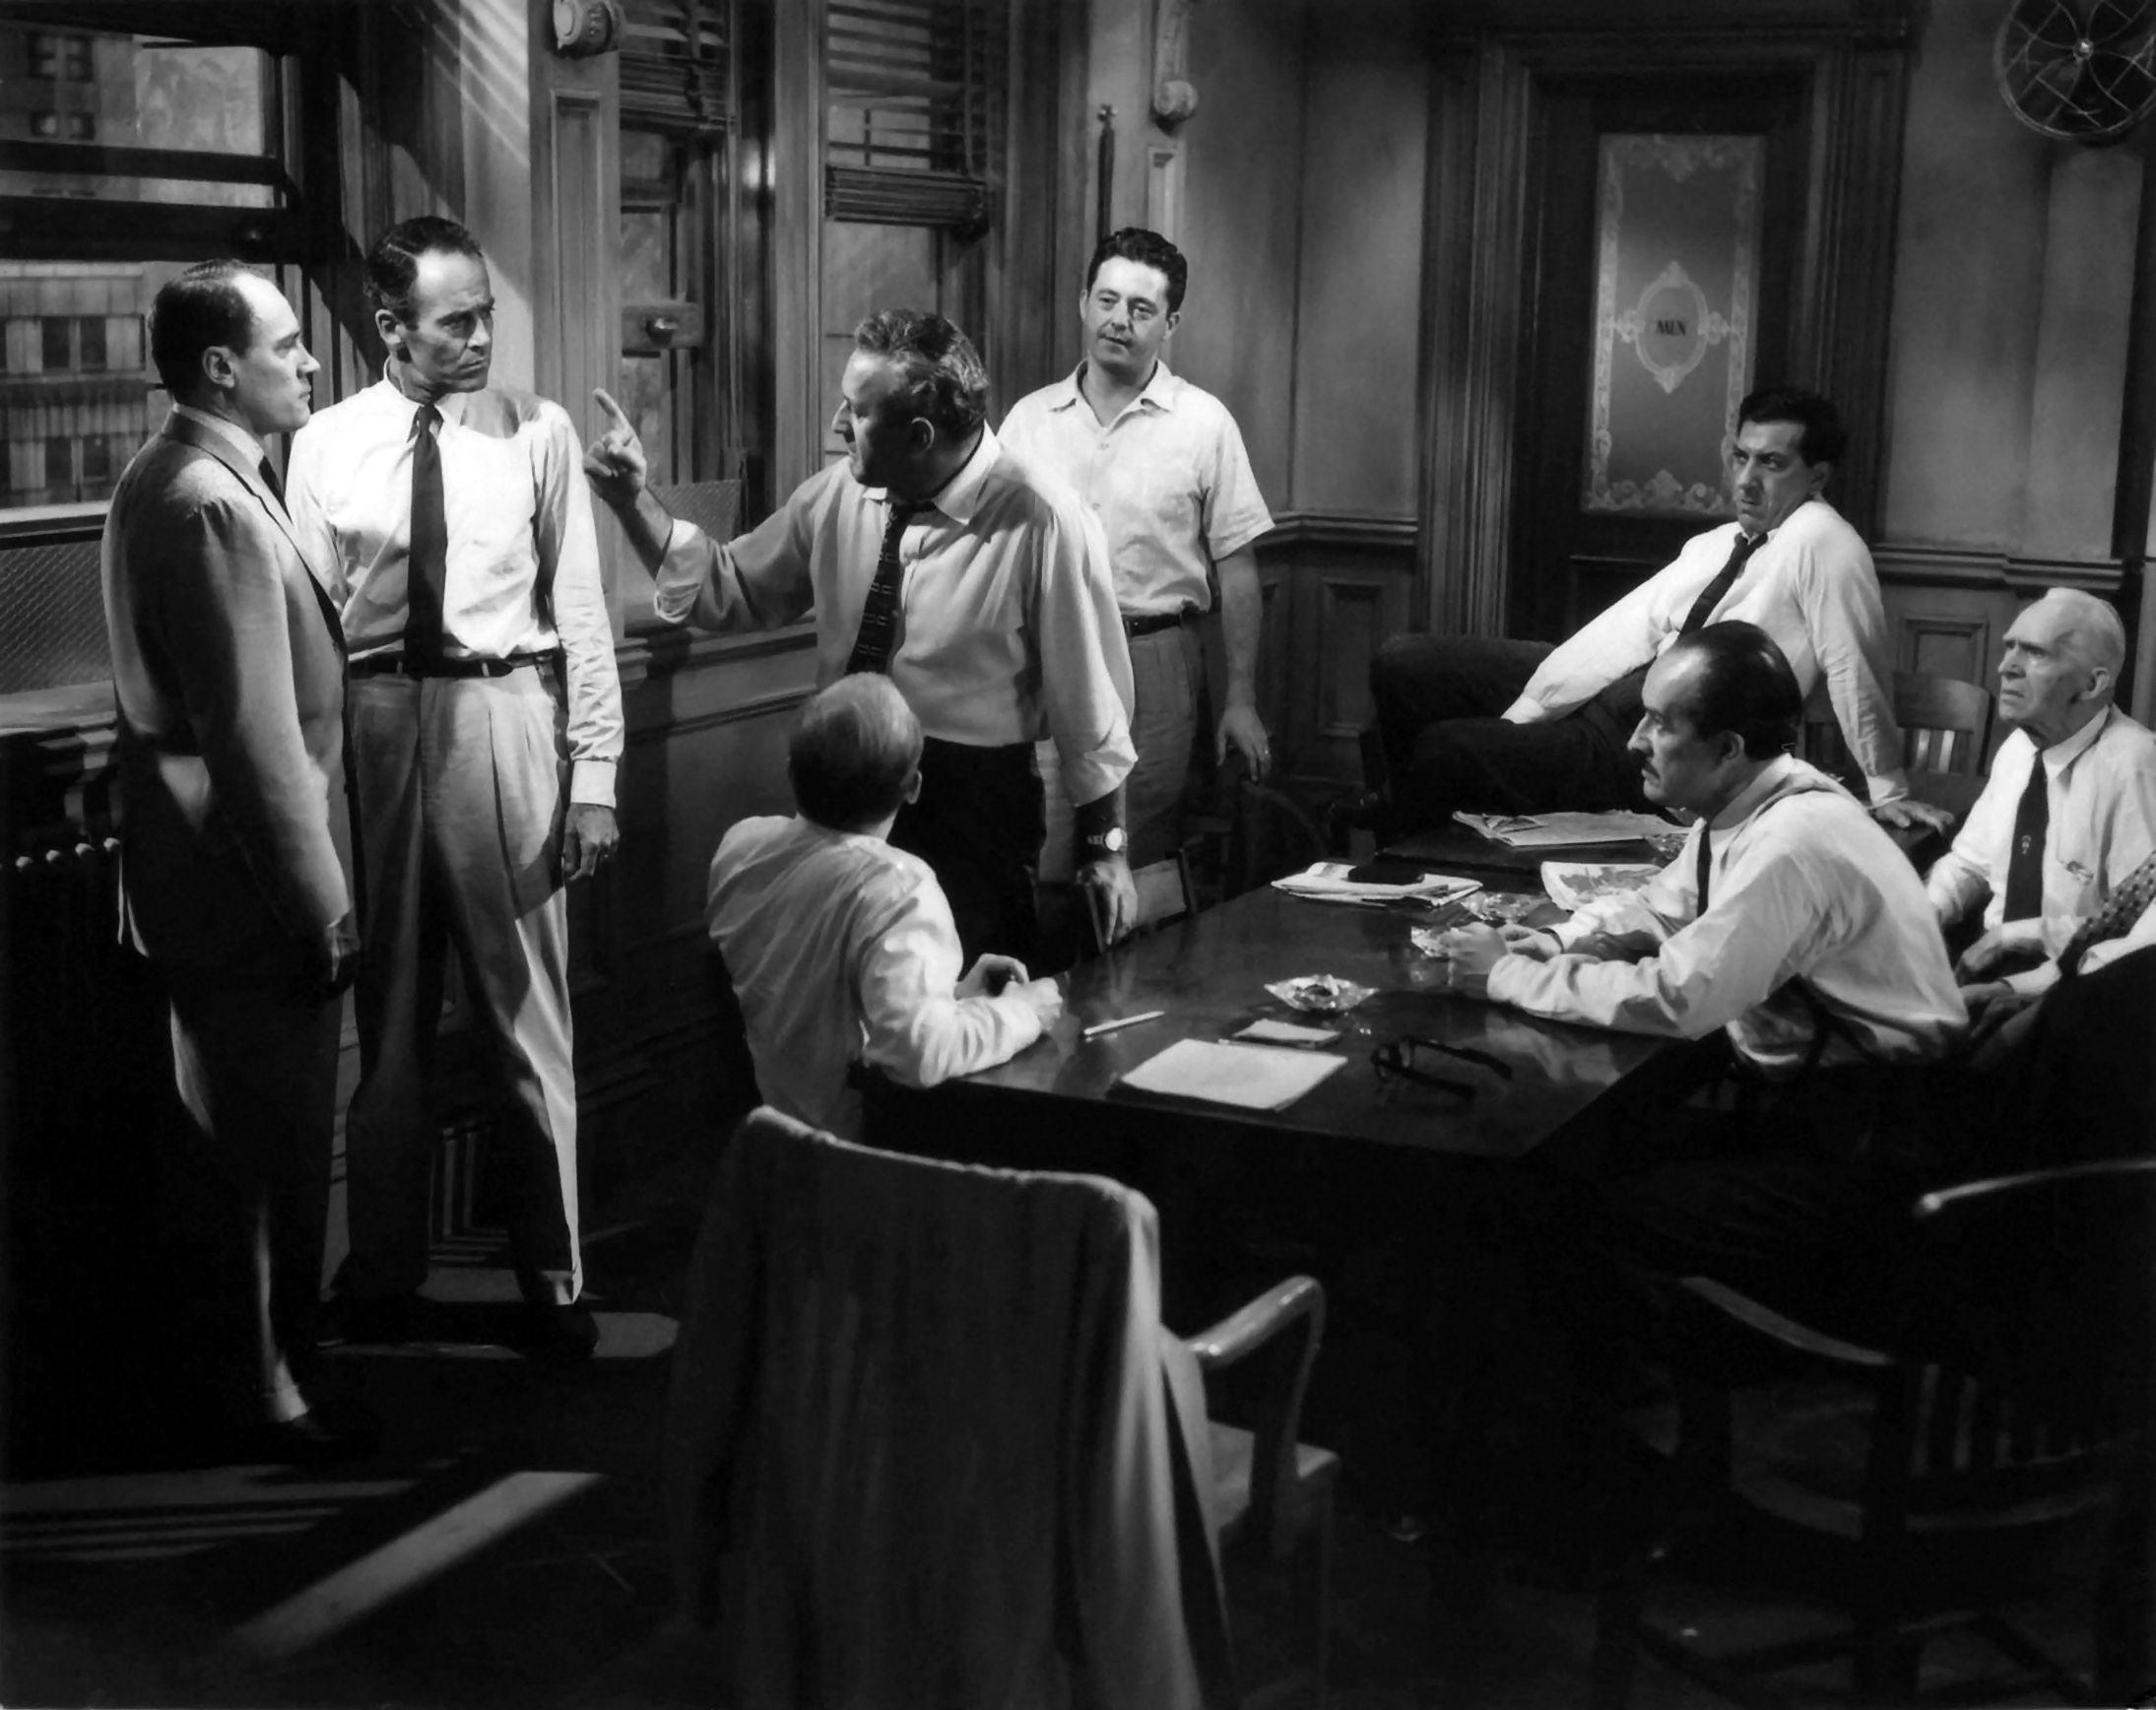 2189x1736px 12 Angry Men.09.2015